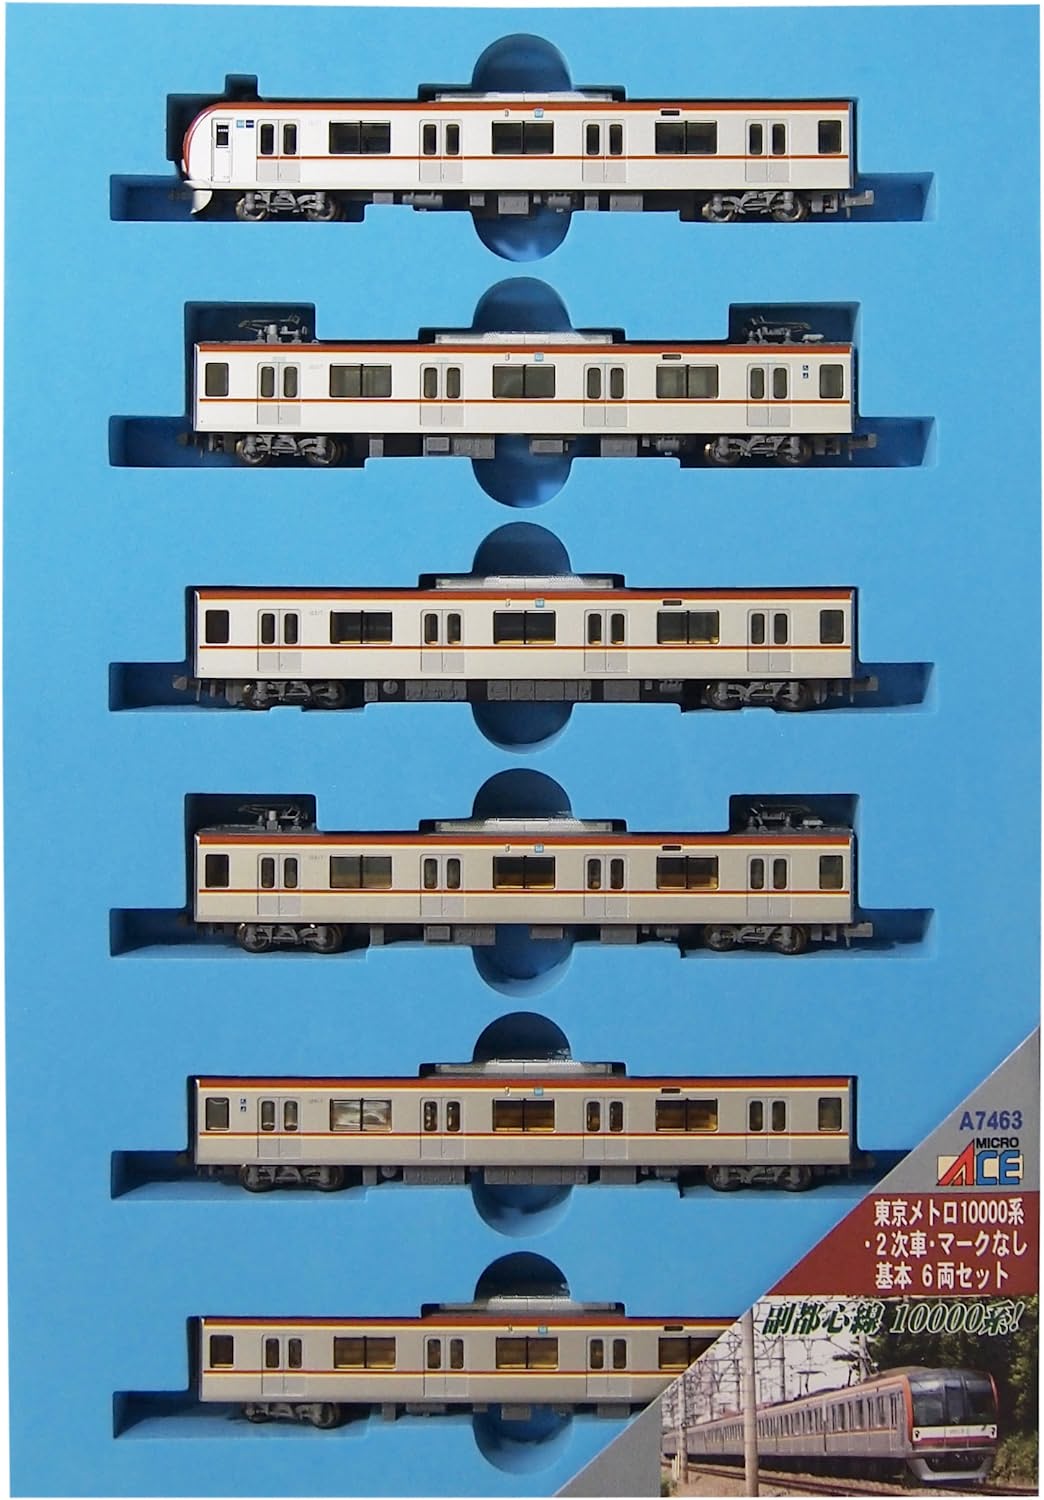 Micro Ace A7463 Tokyo Metro Series 10000/Secondary Car/Unmarked Basic 6-Car N Scale